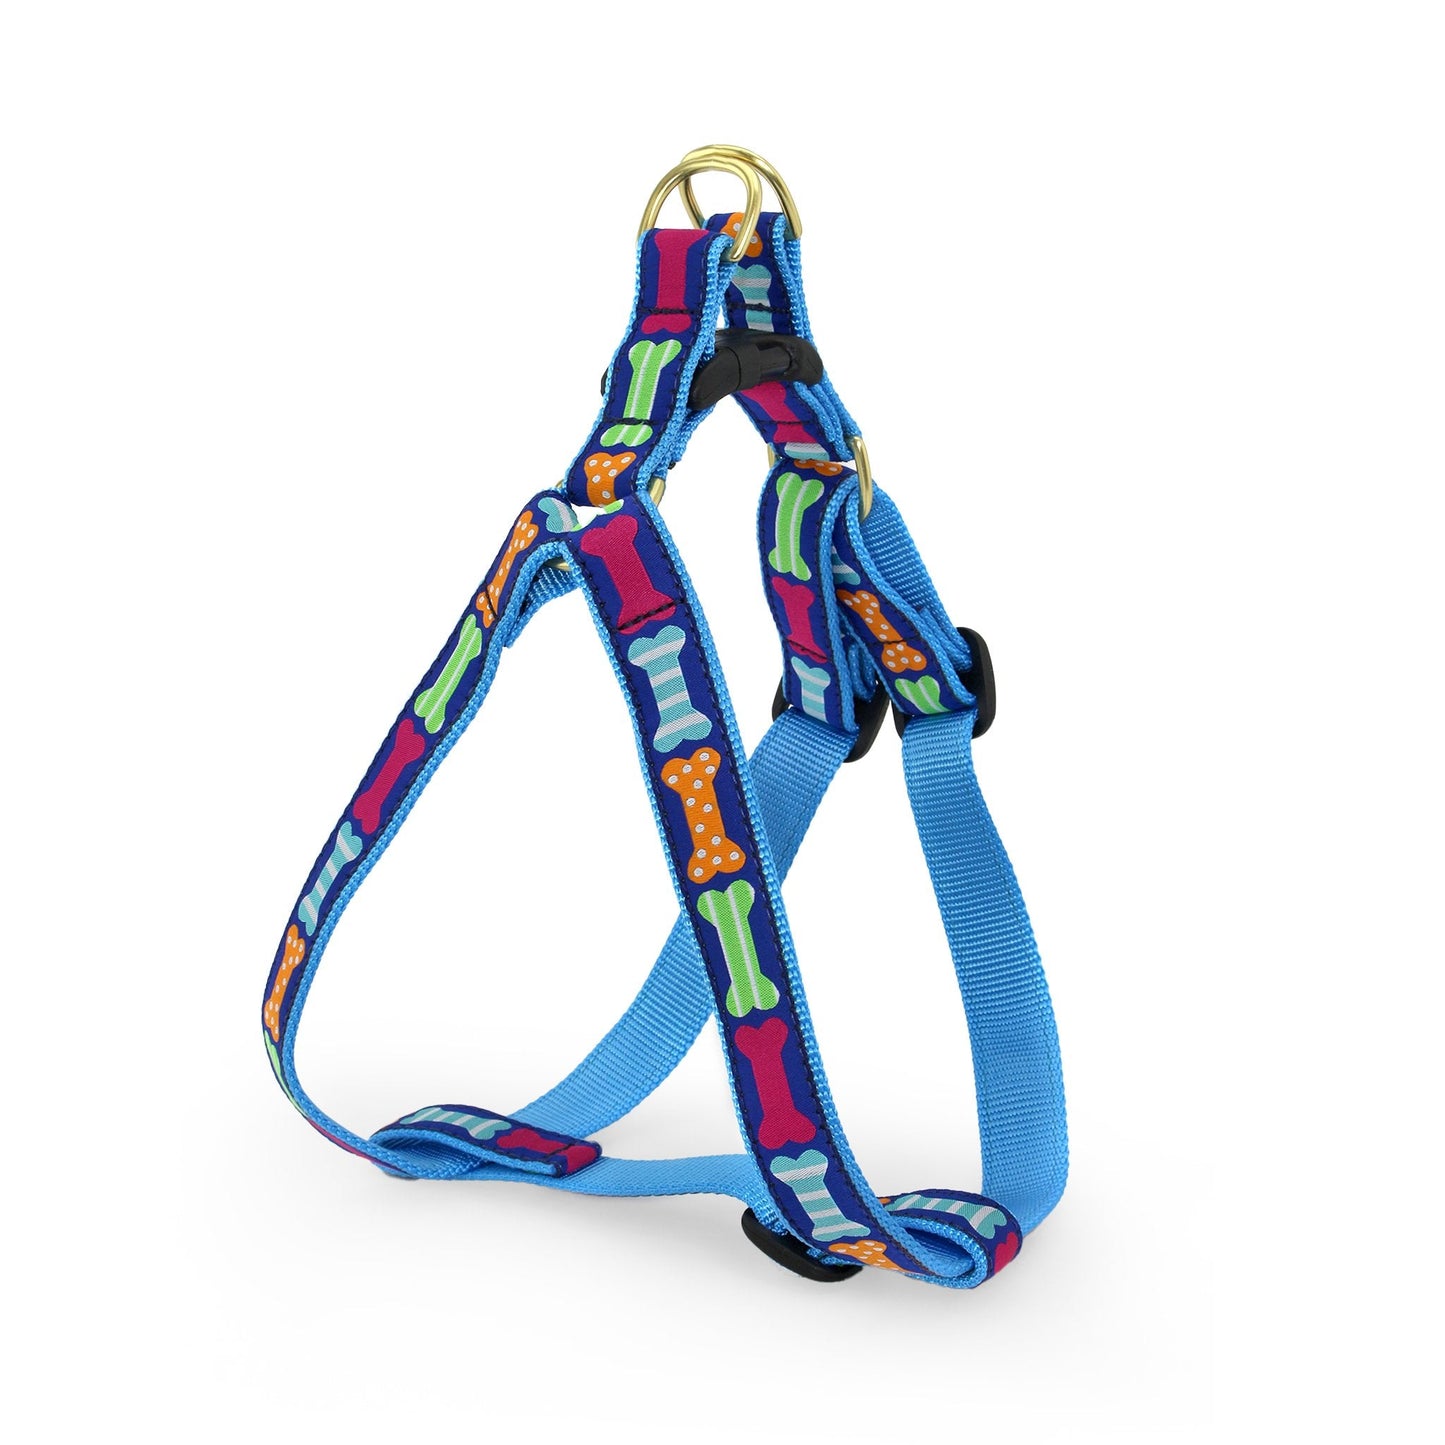 Big Bones Dog Harness by Up Country